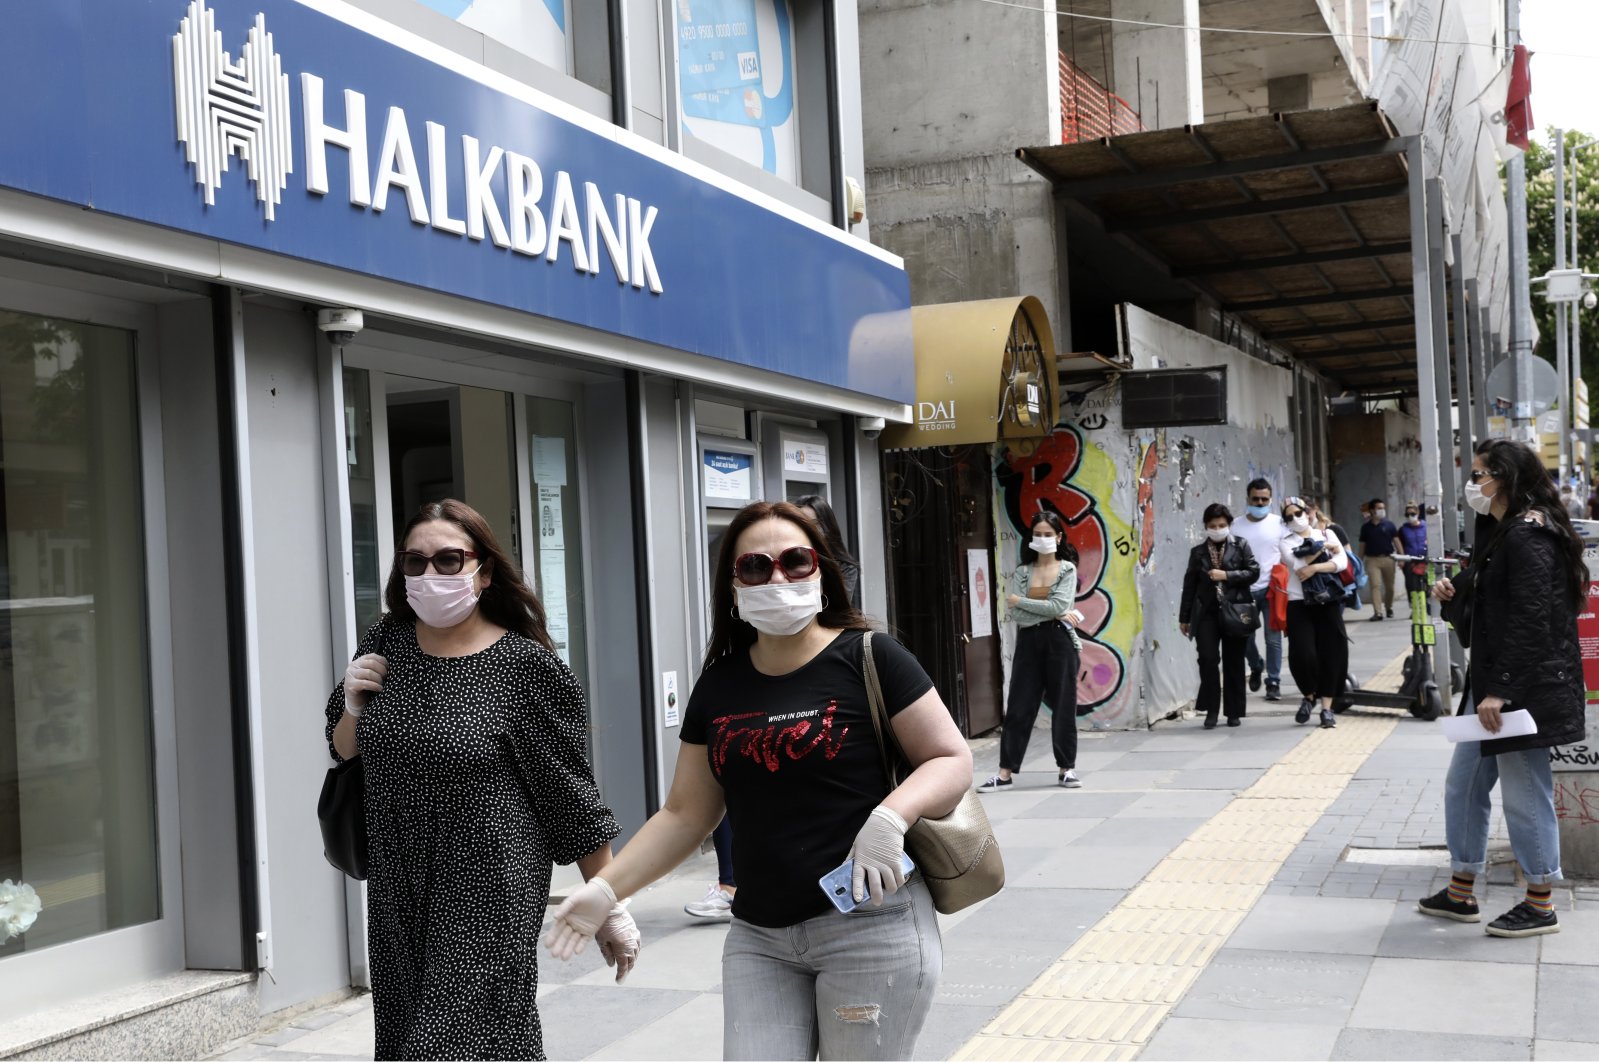 People wearing masks pass by the Halkbank branch in the capital Ankara, Turkey, May 11, 2020. (AP Photo)